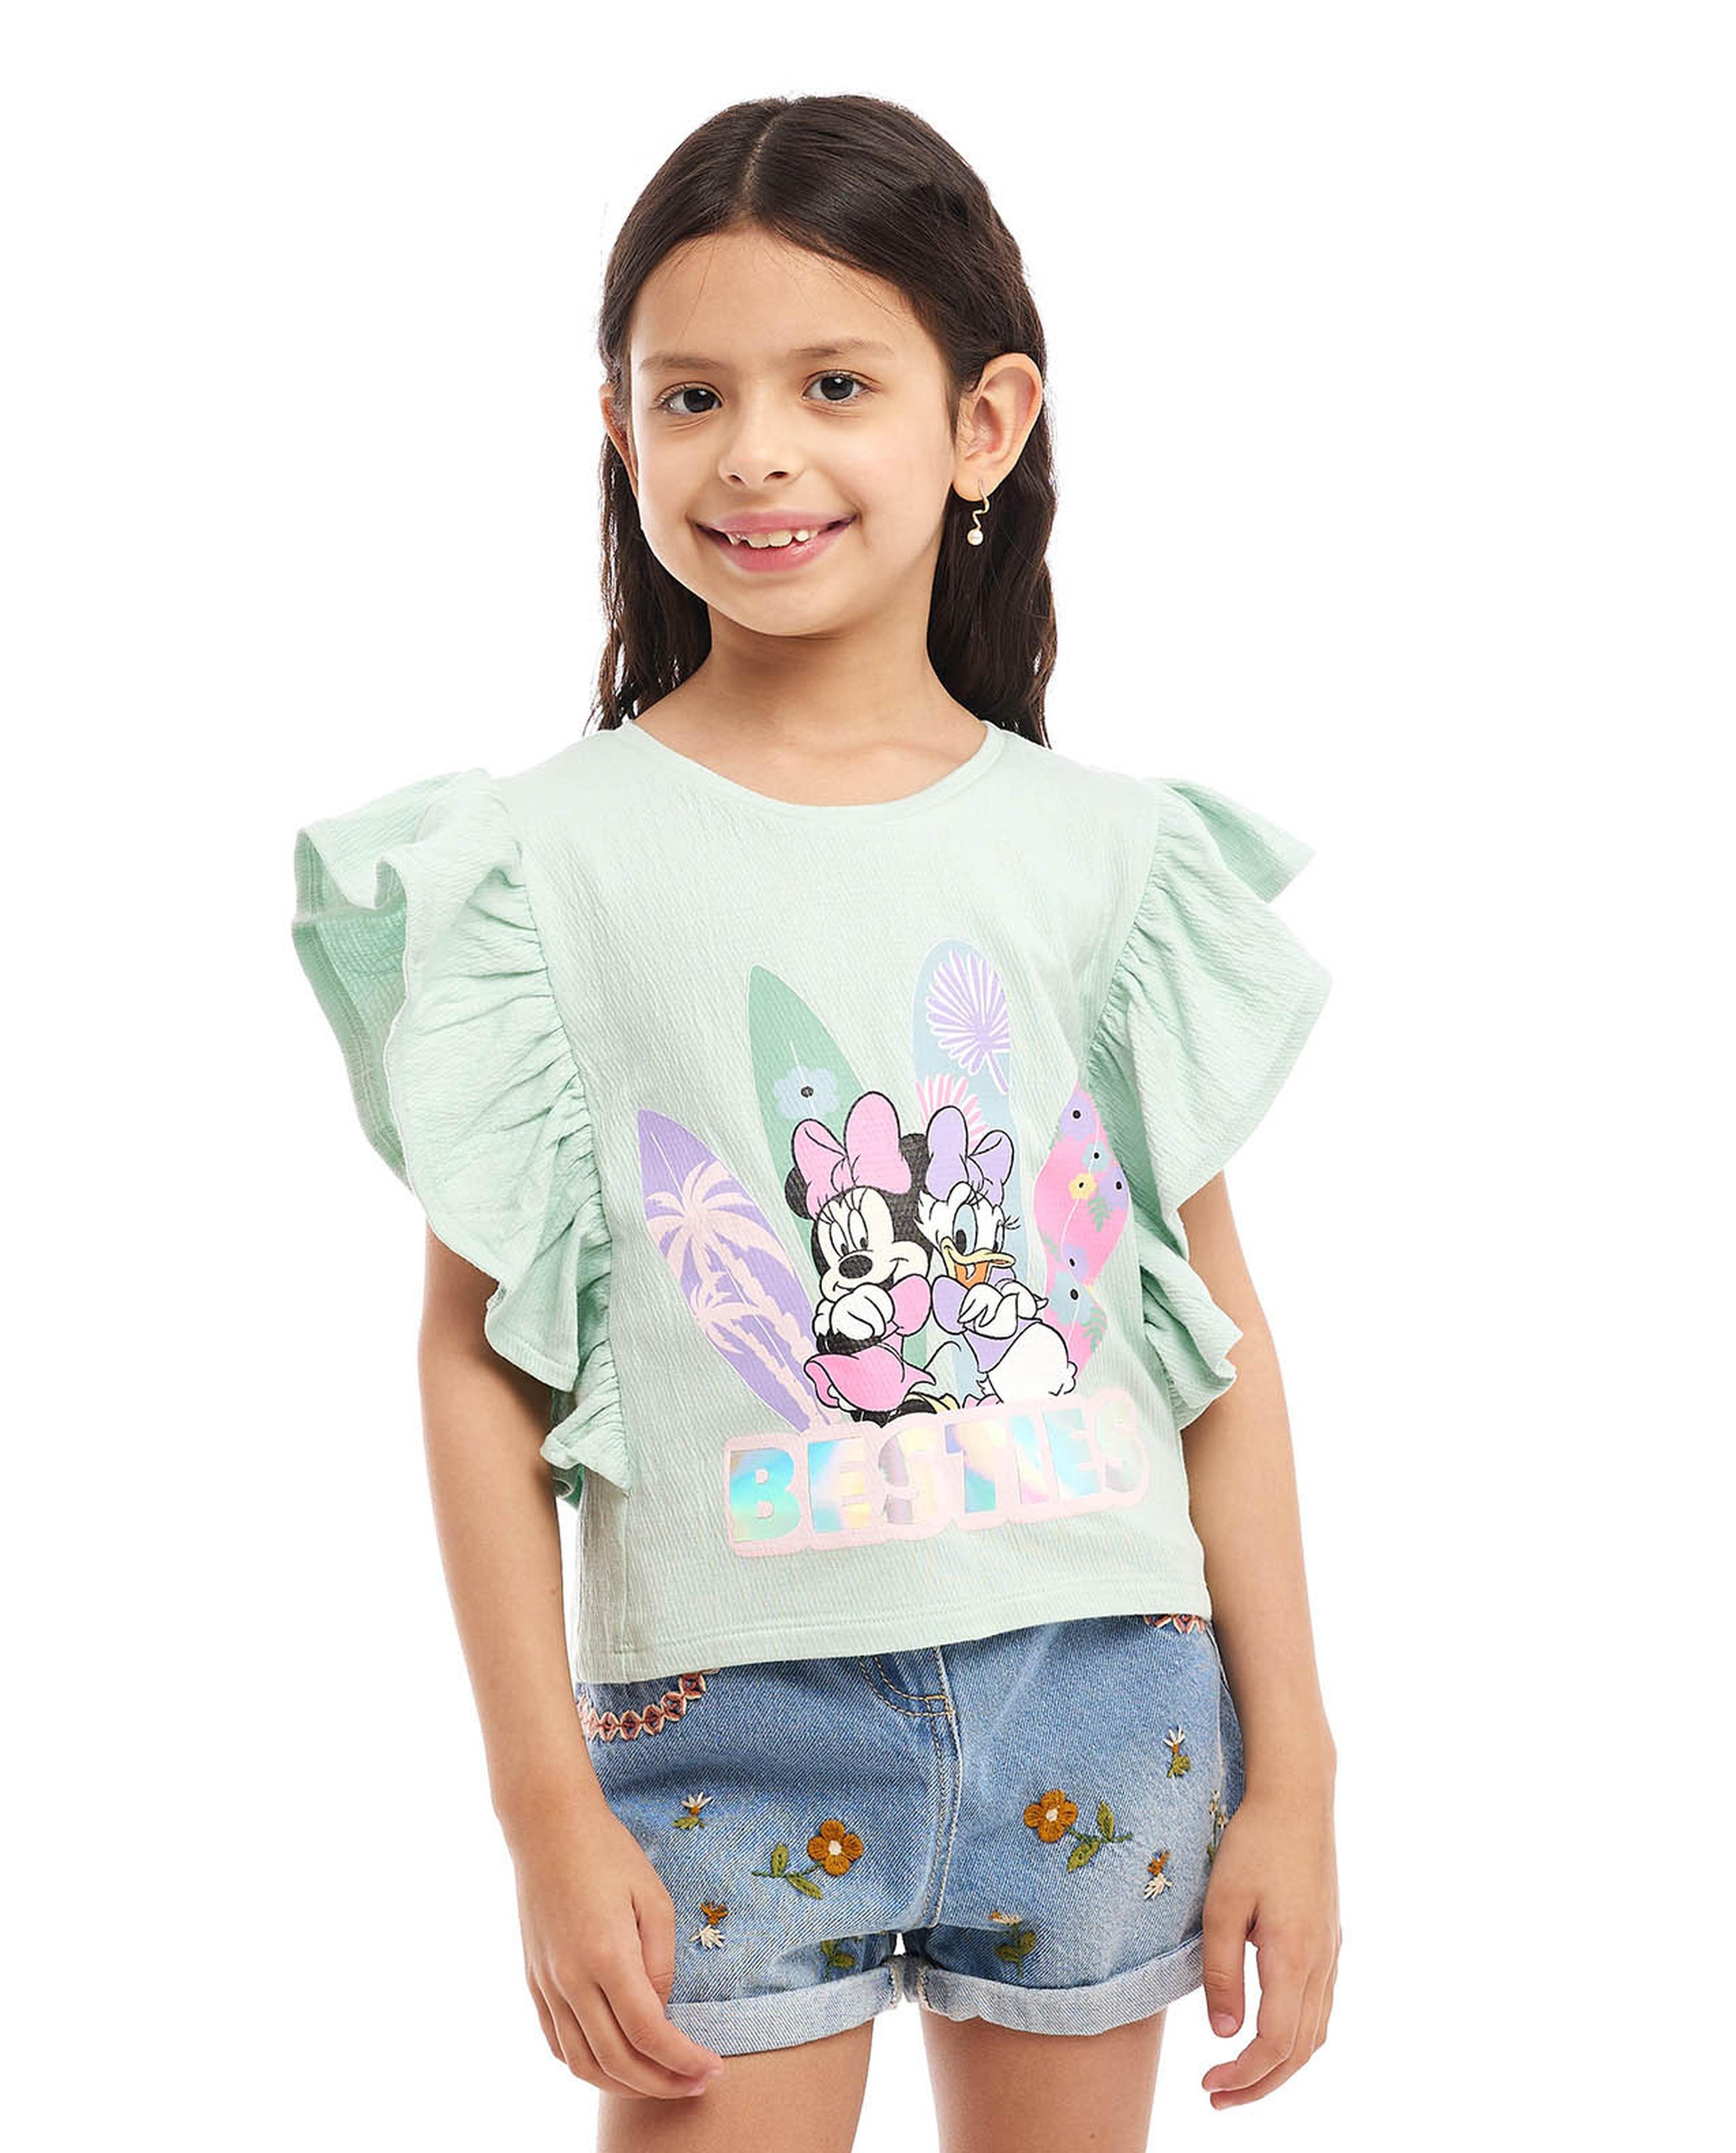 Minnie & Daisy Print Top with Crew Neck and Flutter Sleeves